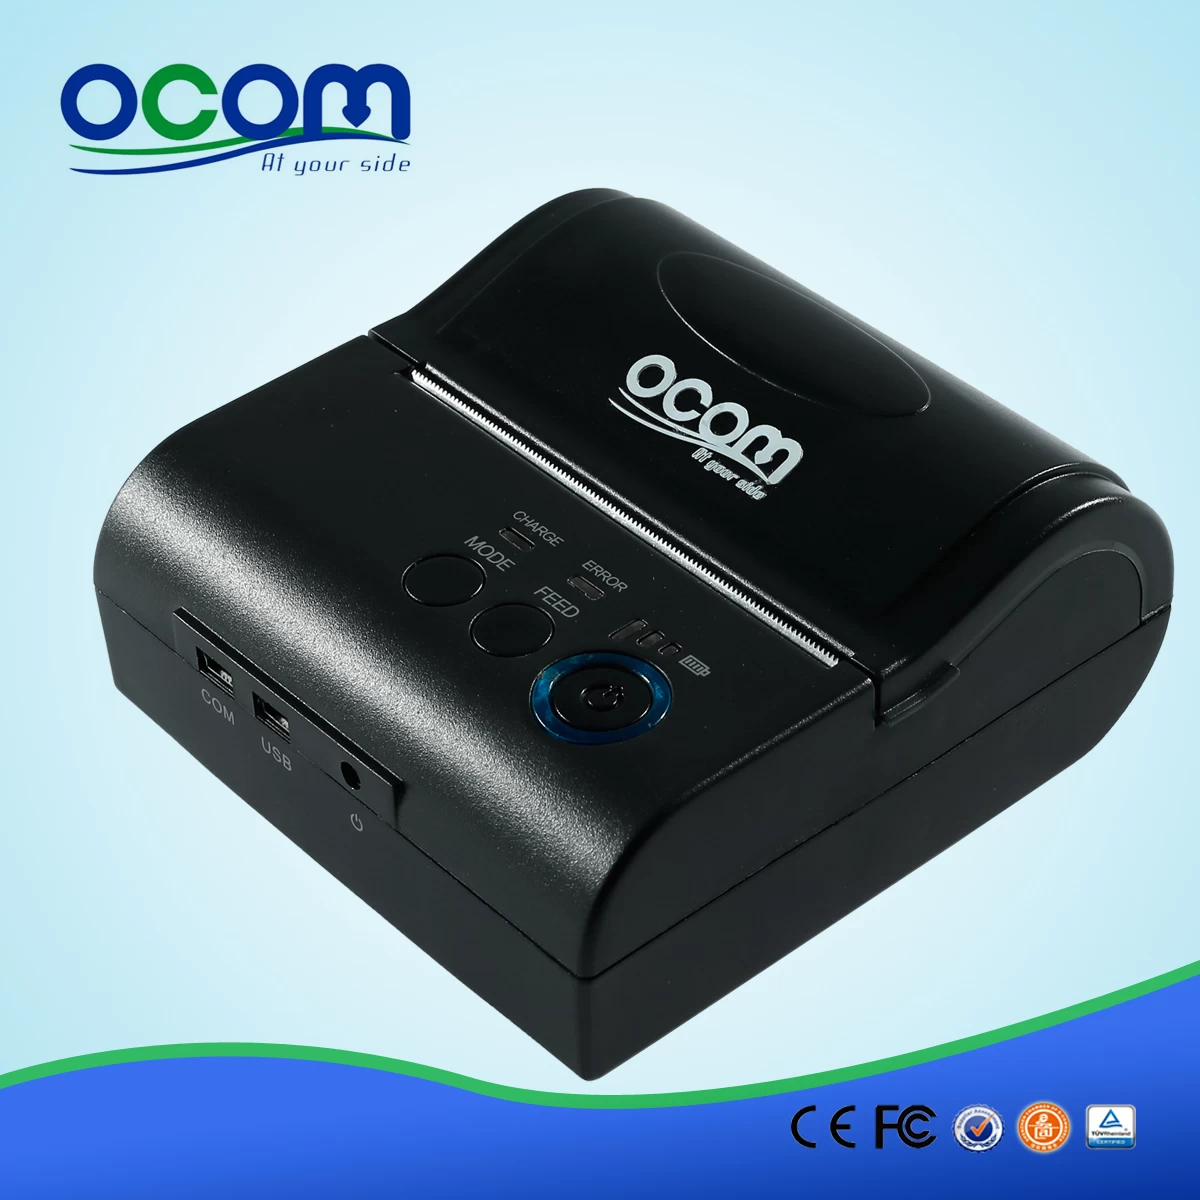 OCPP-M082: Taxi print a receipt with the elegant appearance of 80 mm Bluetooth thermal printer